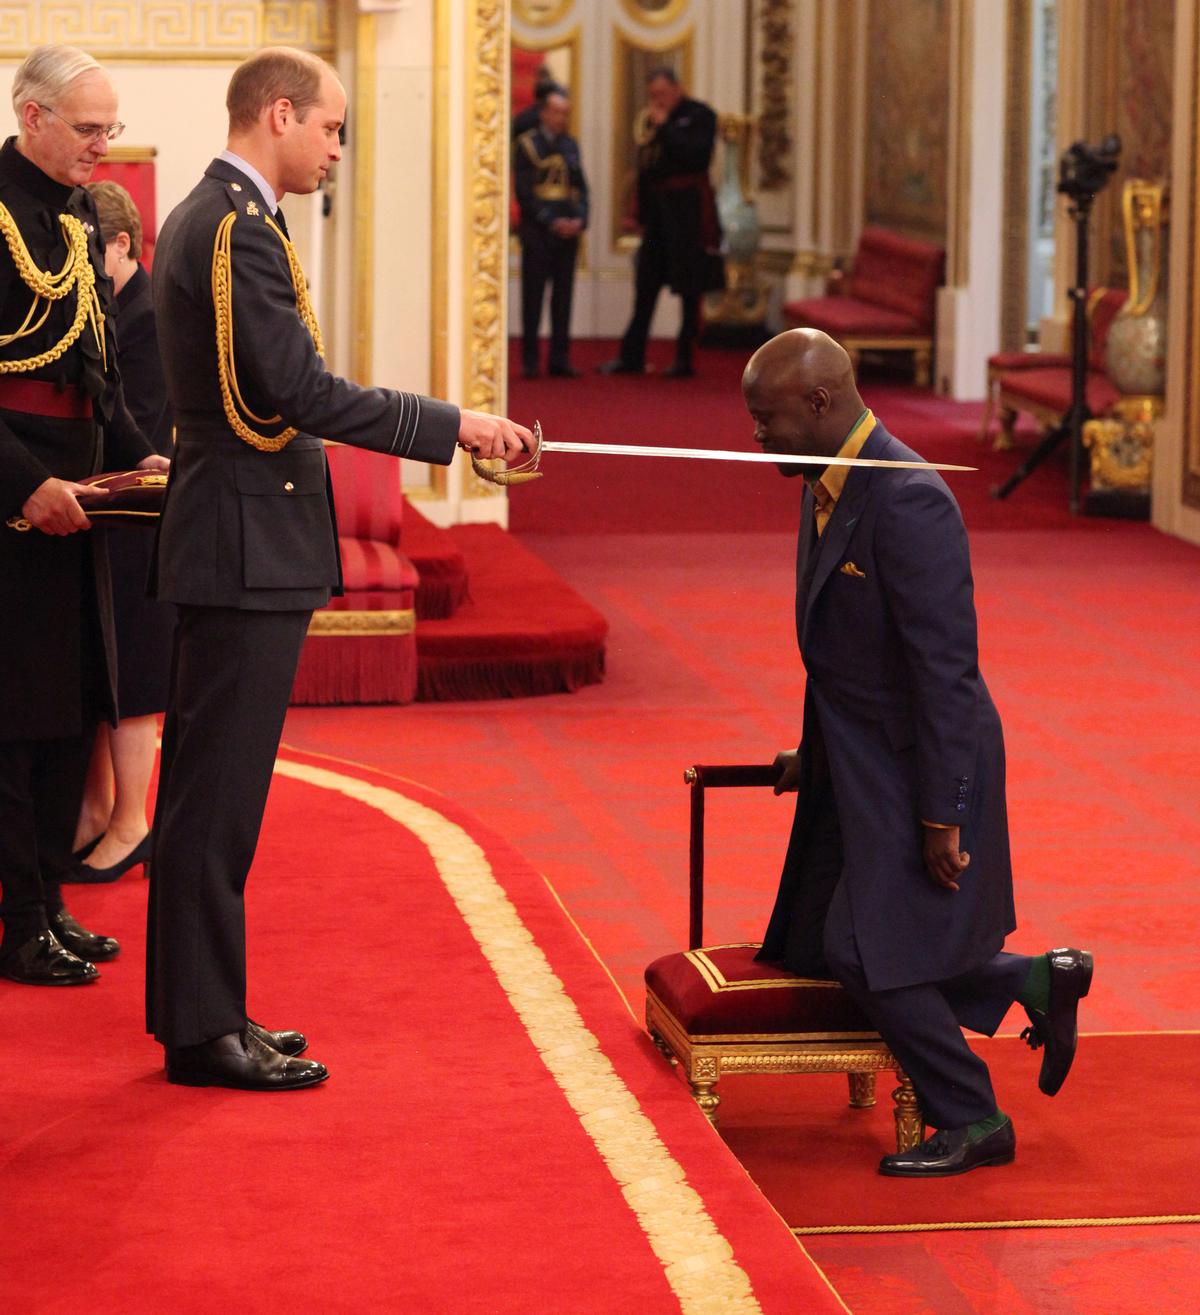 Sir David Adjaye received his award from Prince William, Duke of Cambridge at an official Investiture ceremony held at Buckingham Palace. / Yui Mok/PA Wire/PA Images